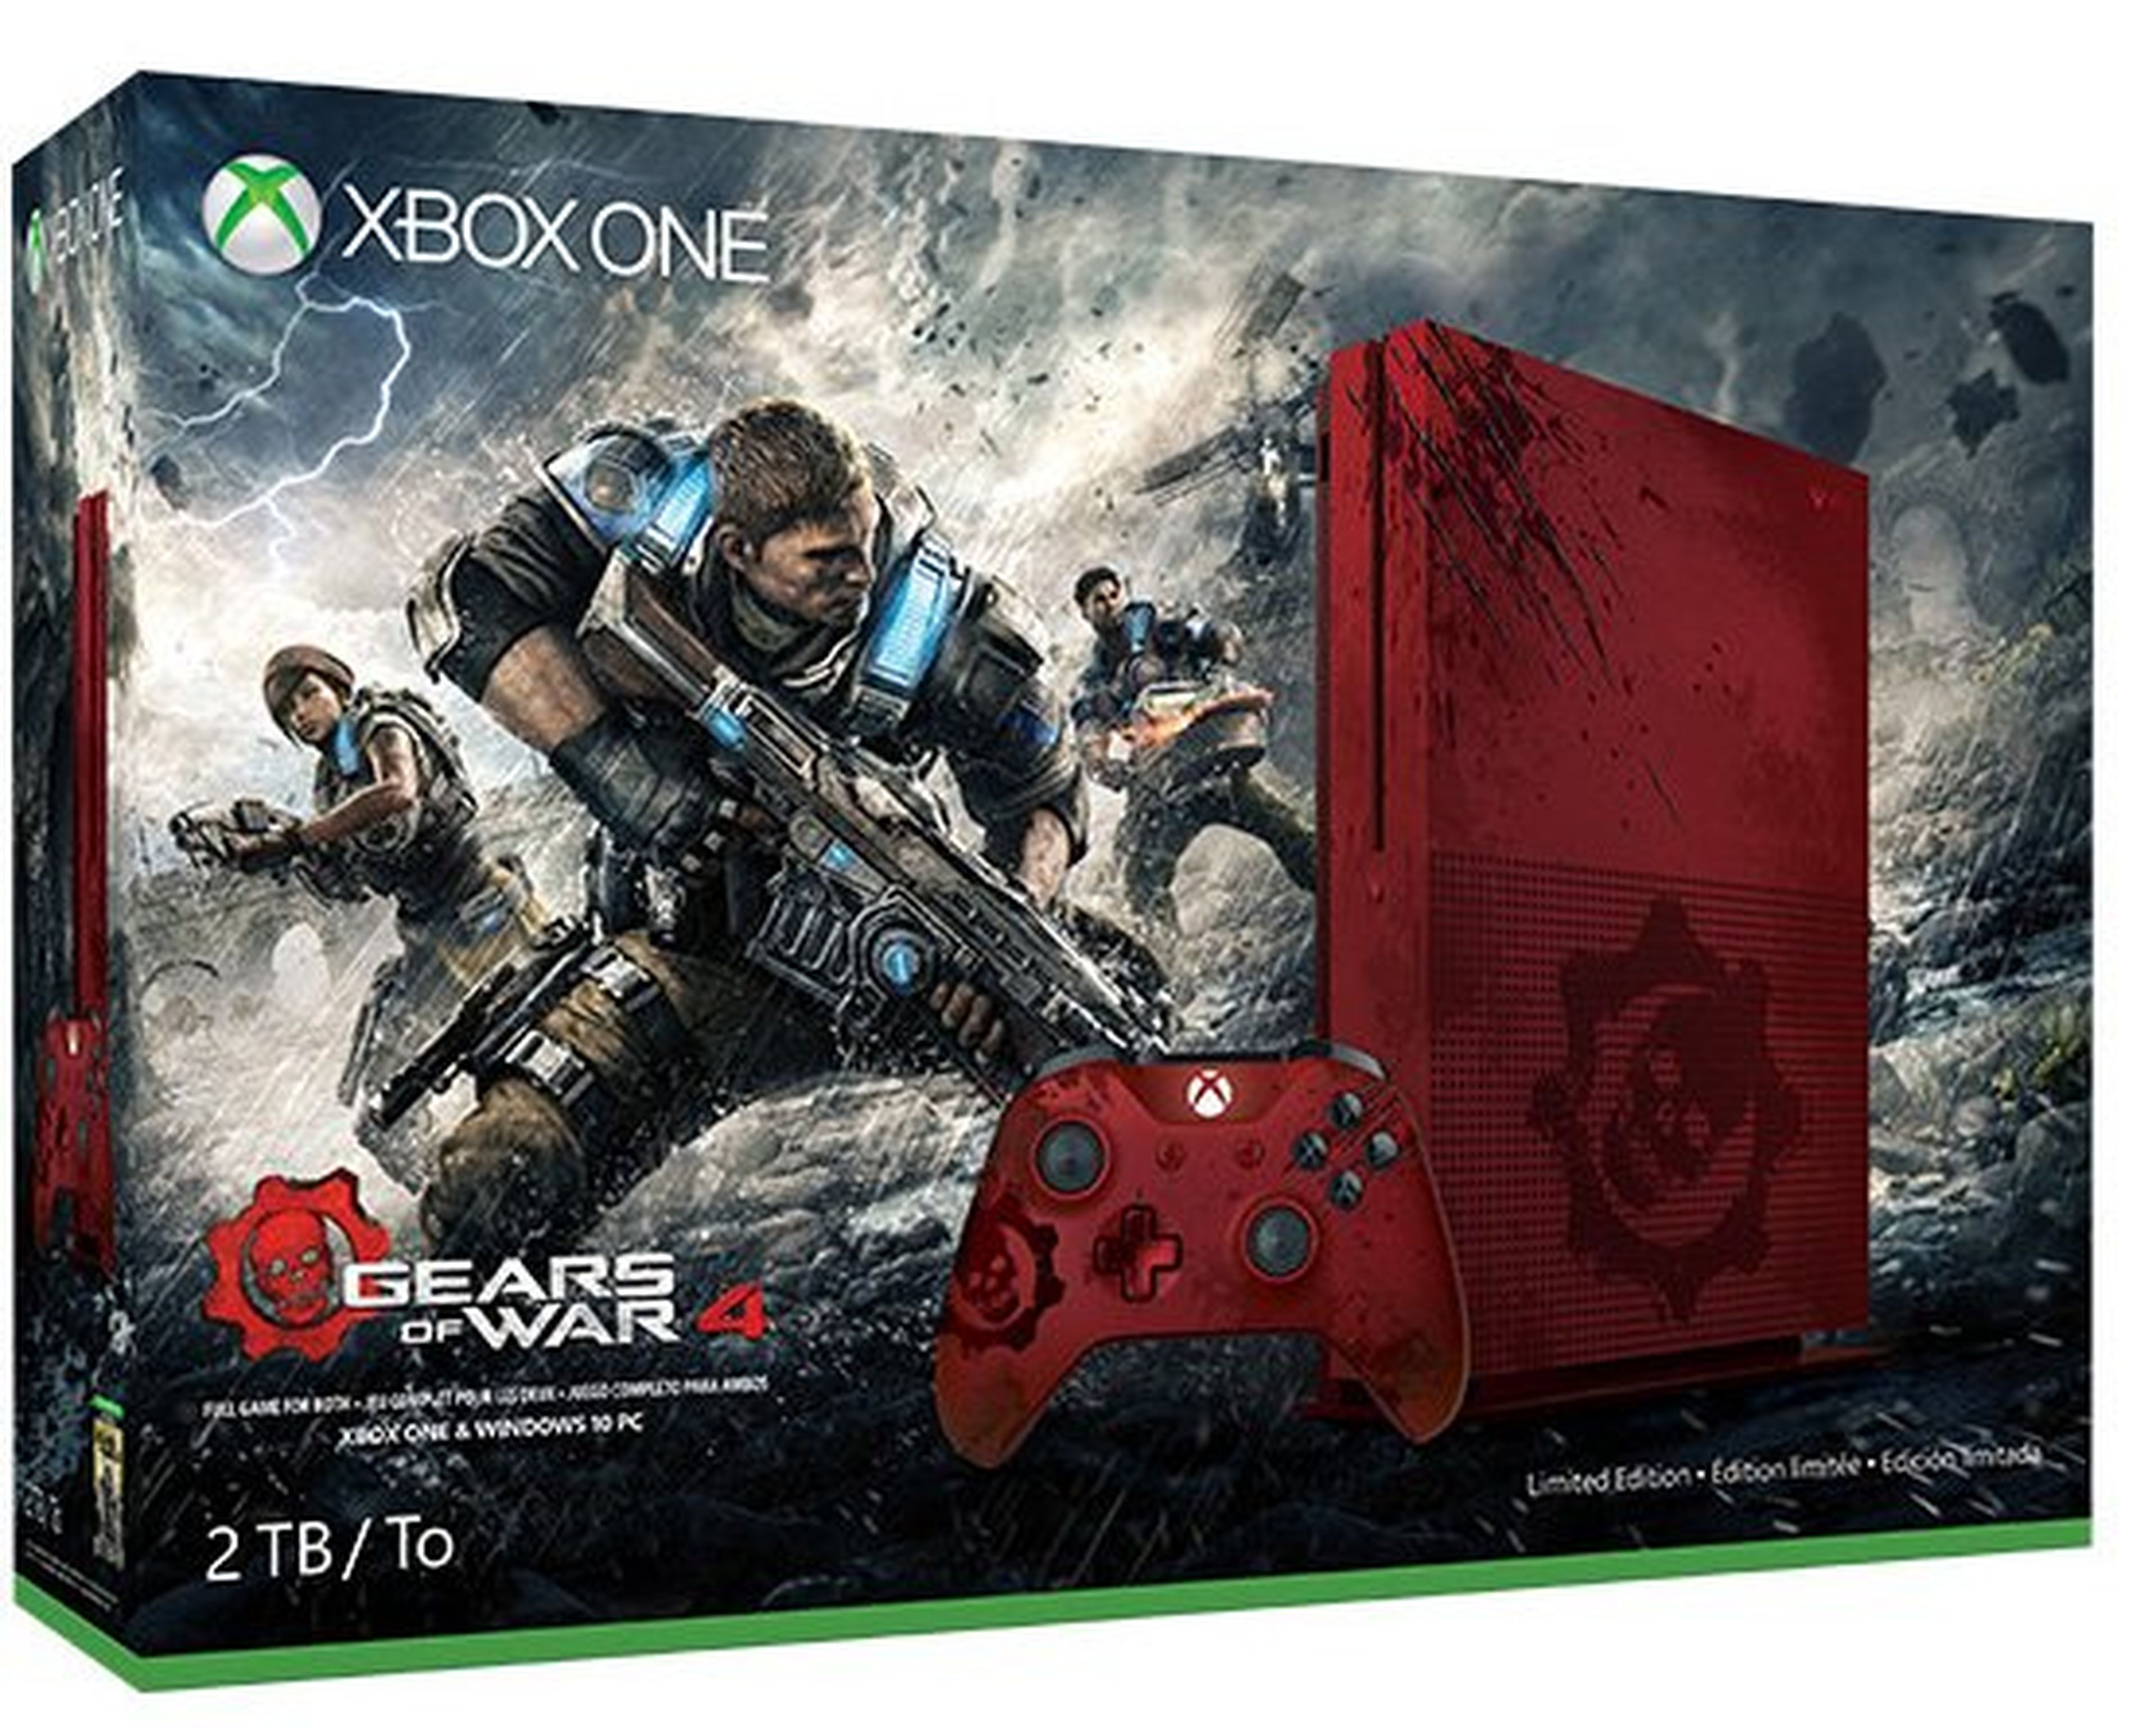 Xbox One S Gears of War 4 Edition